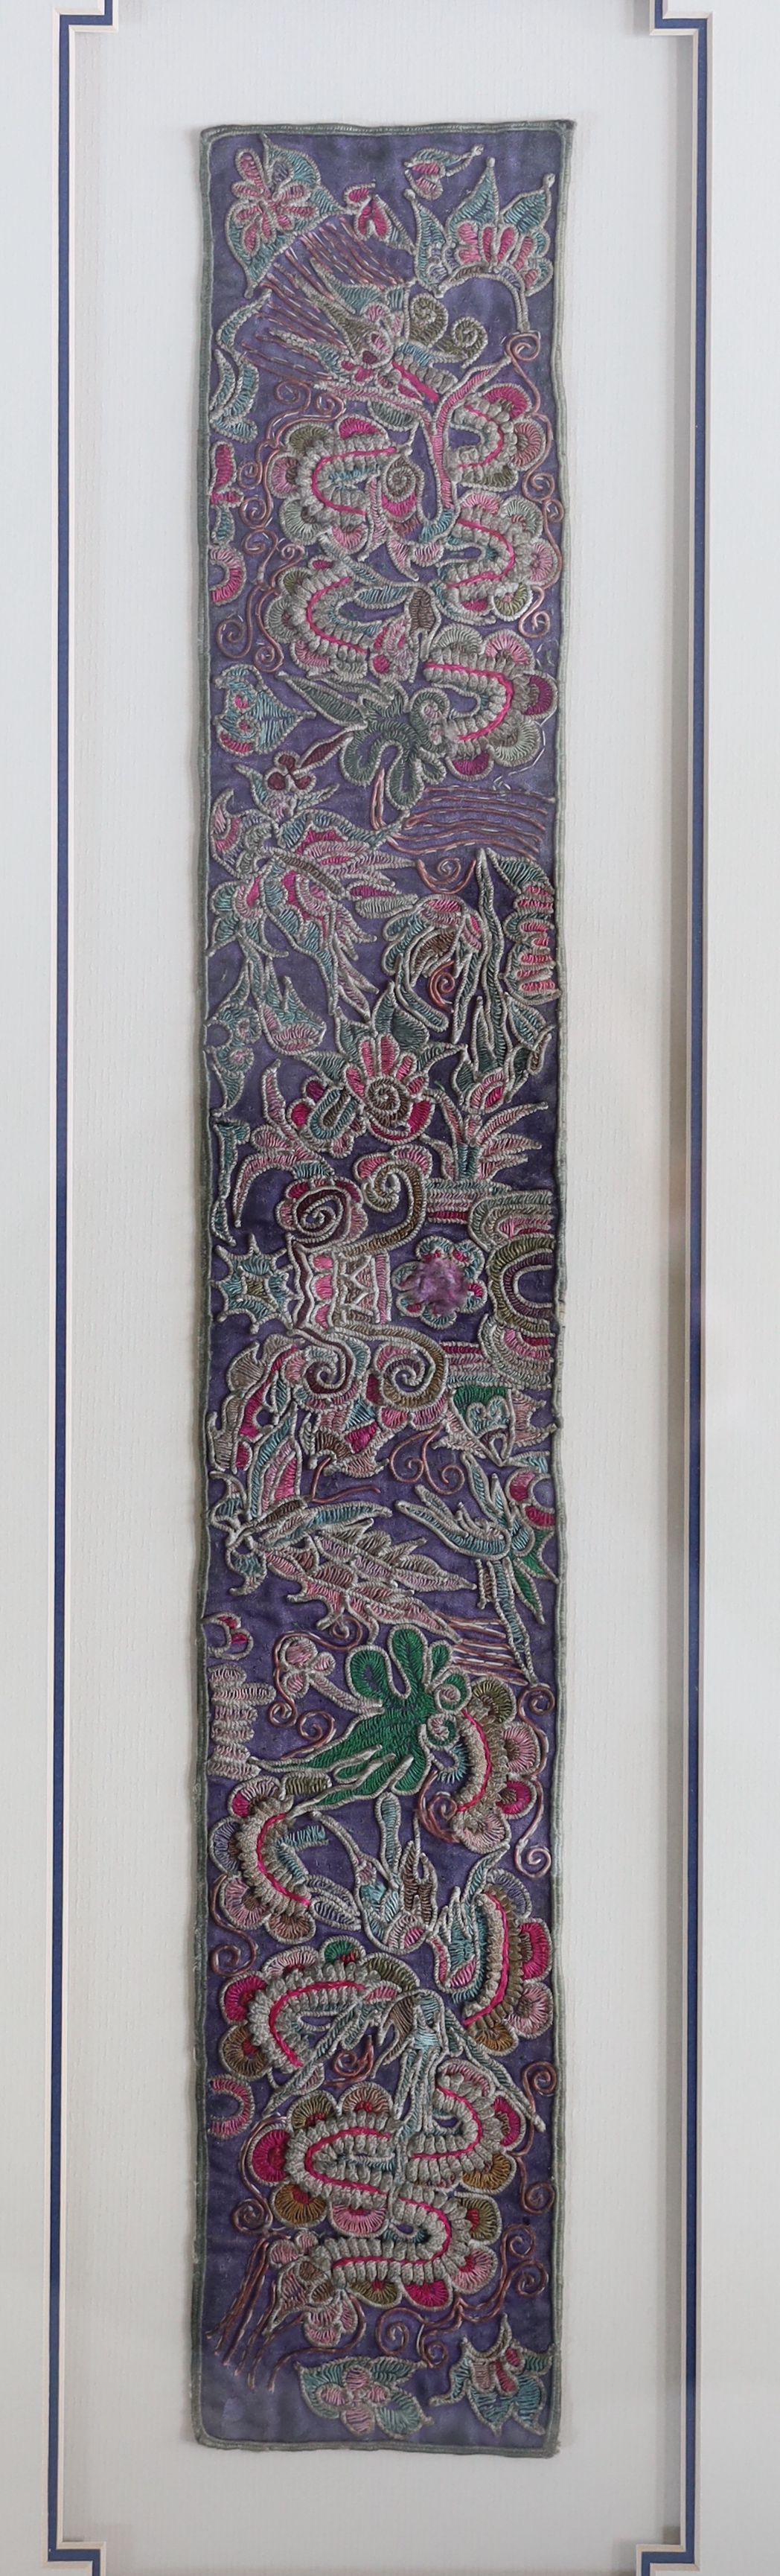 Two 19th century Chinese sleeve bands, embroidered in rich polychromes silks, designed with - Image 3 of 3